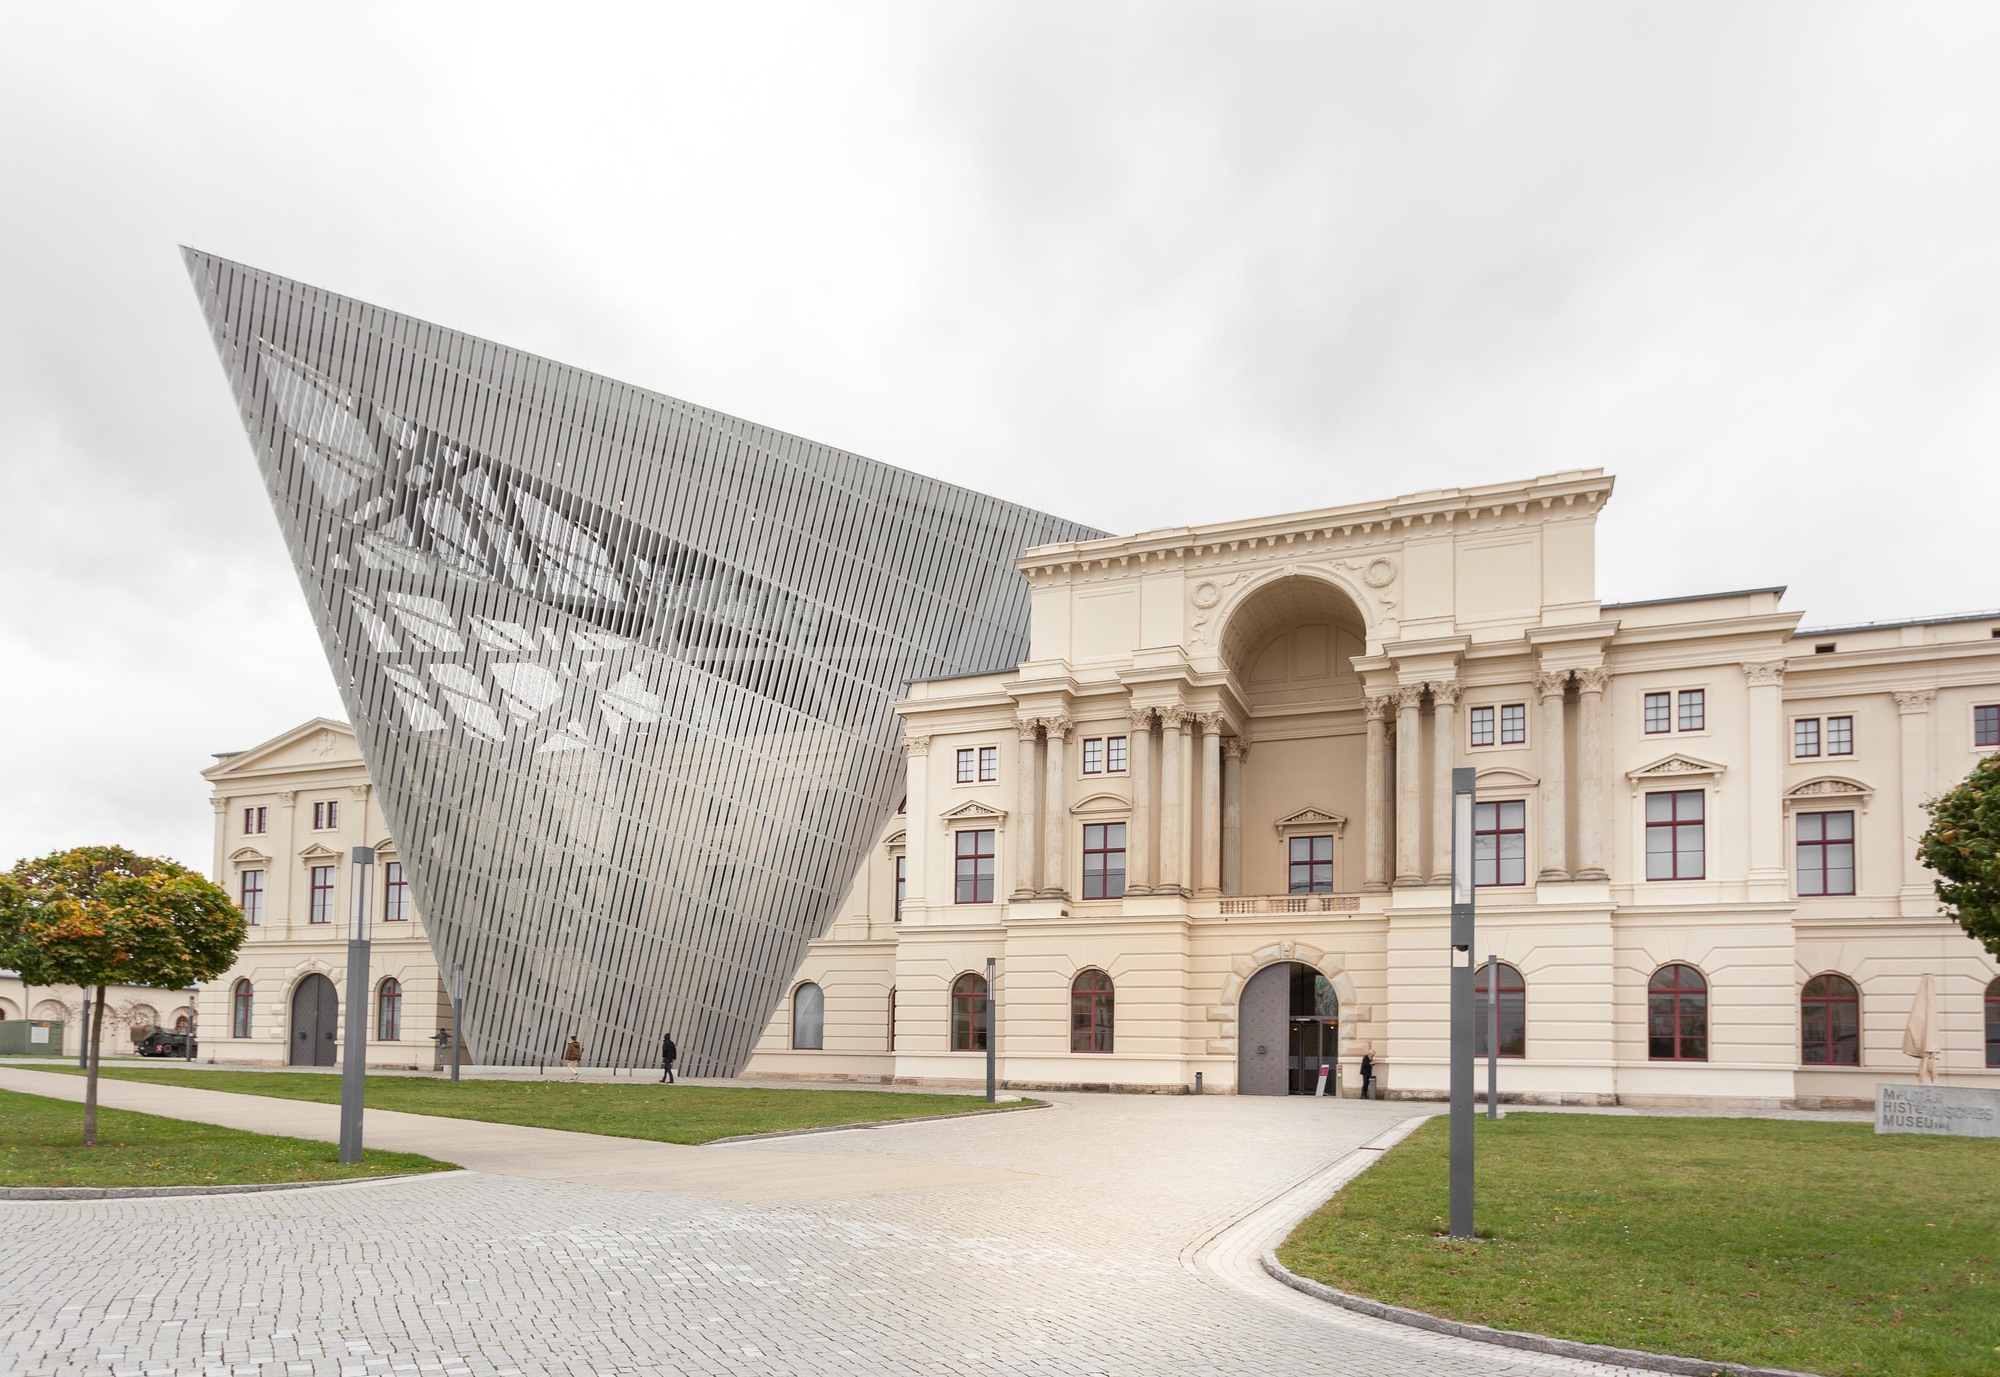  Military History Museum, by Daniel Libeskind